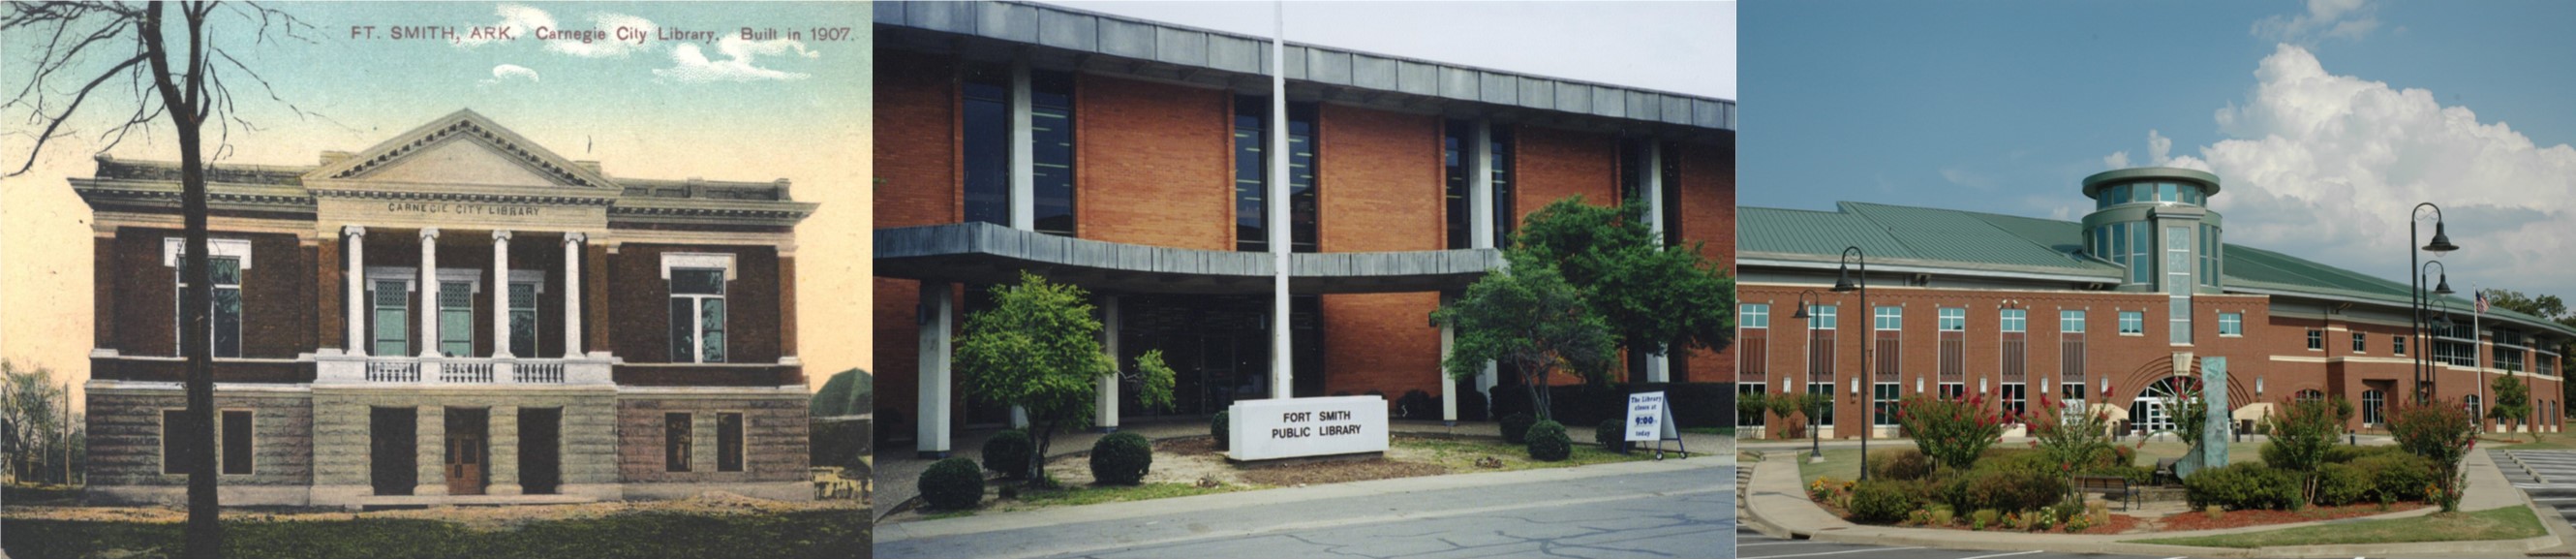 Various Stages of the Fort Smith Public Library